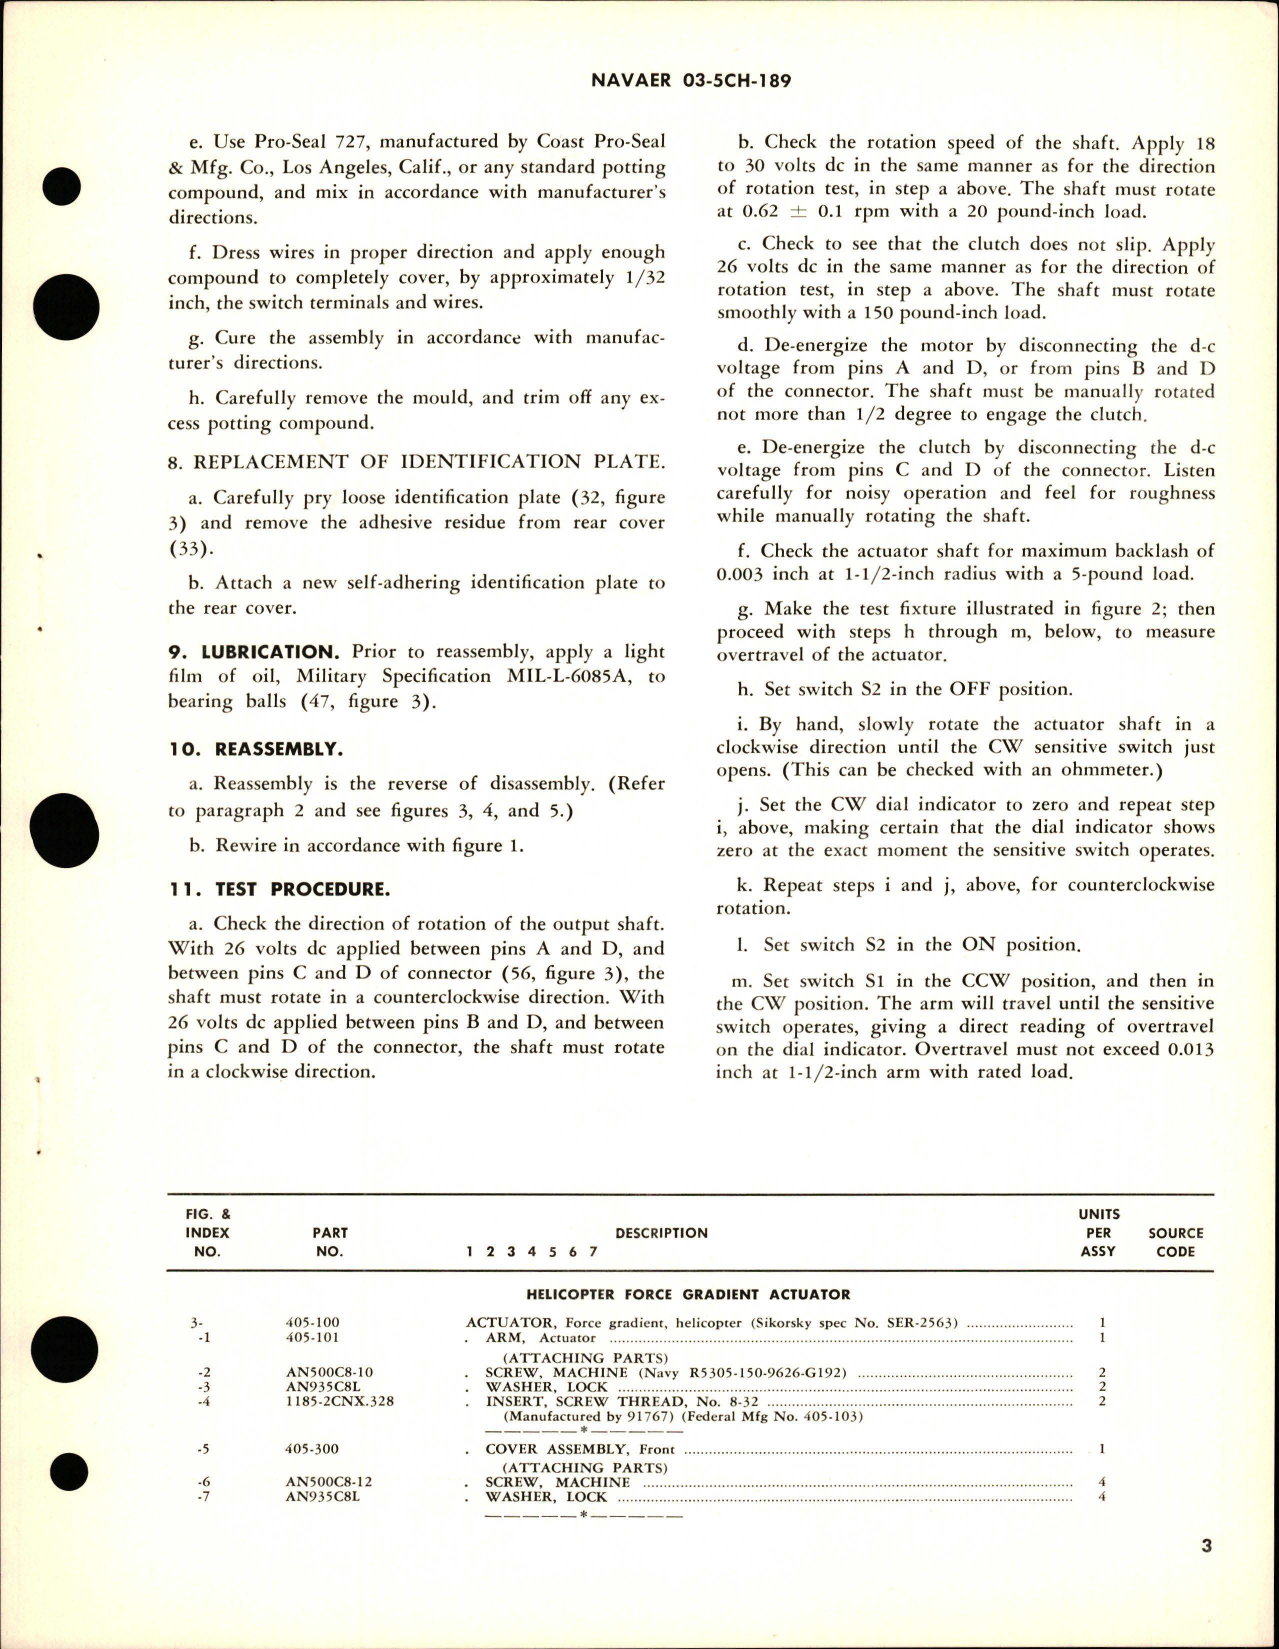 Sample page 5 from AirCorps Library document: Overhaul Instructions with Parts Breakdown for Helicopter Force Gradient Actuator - Part 405-100